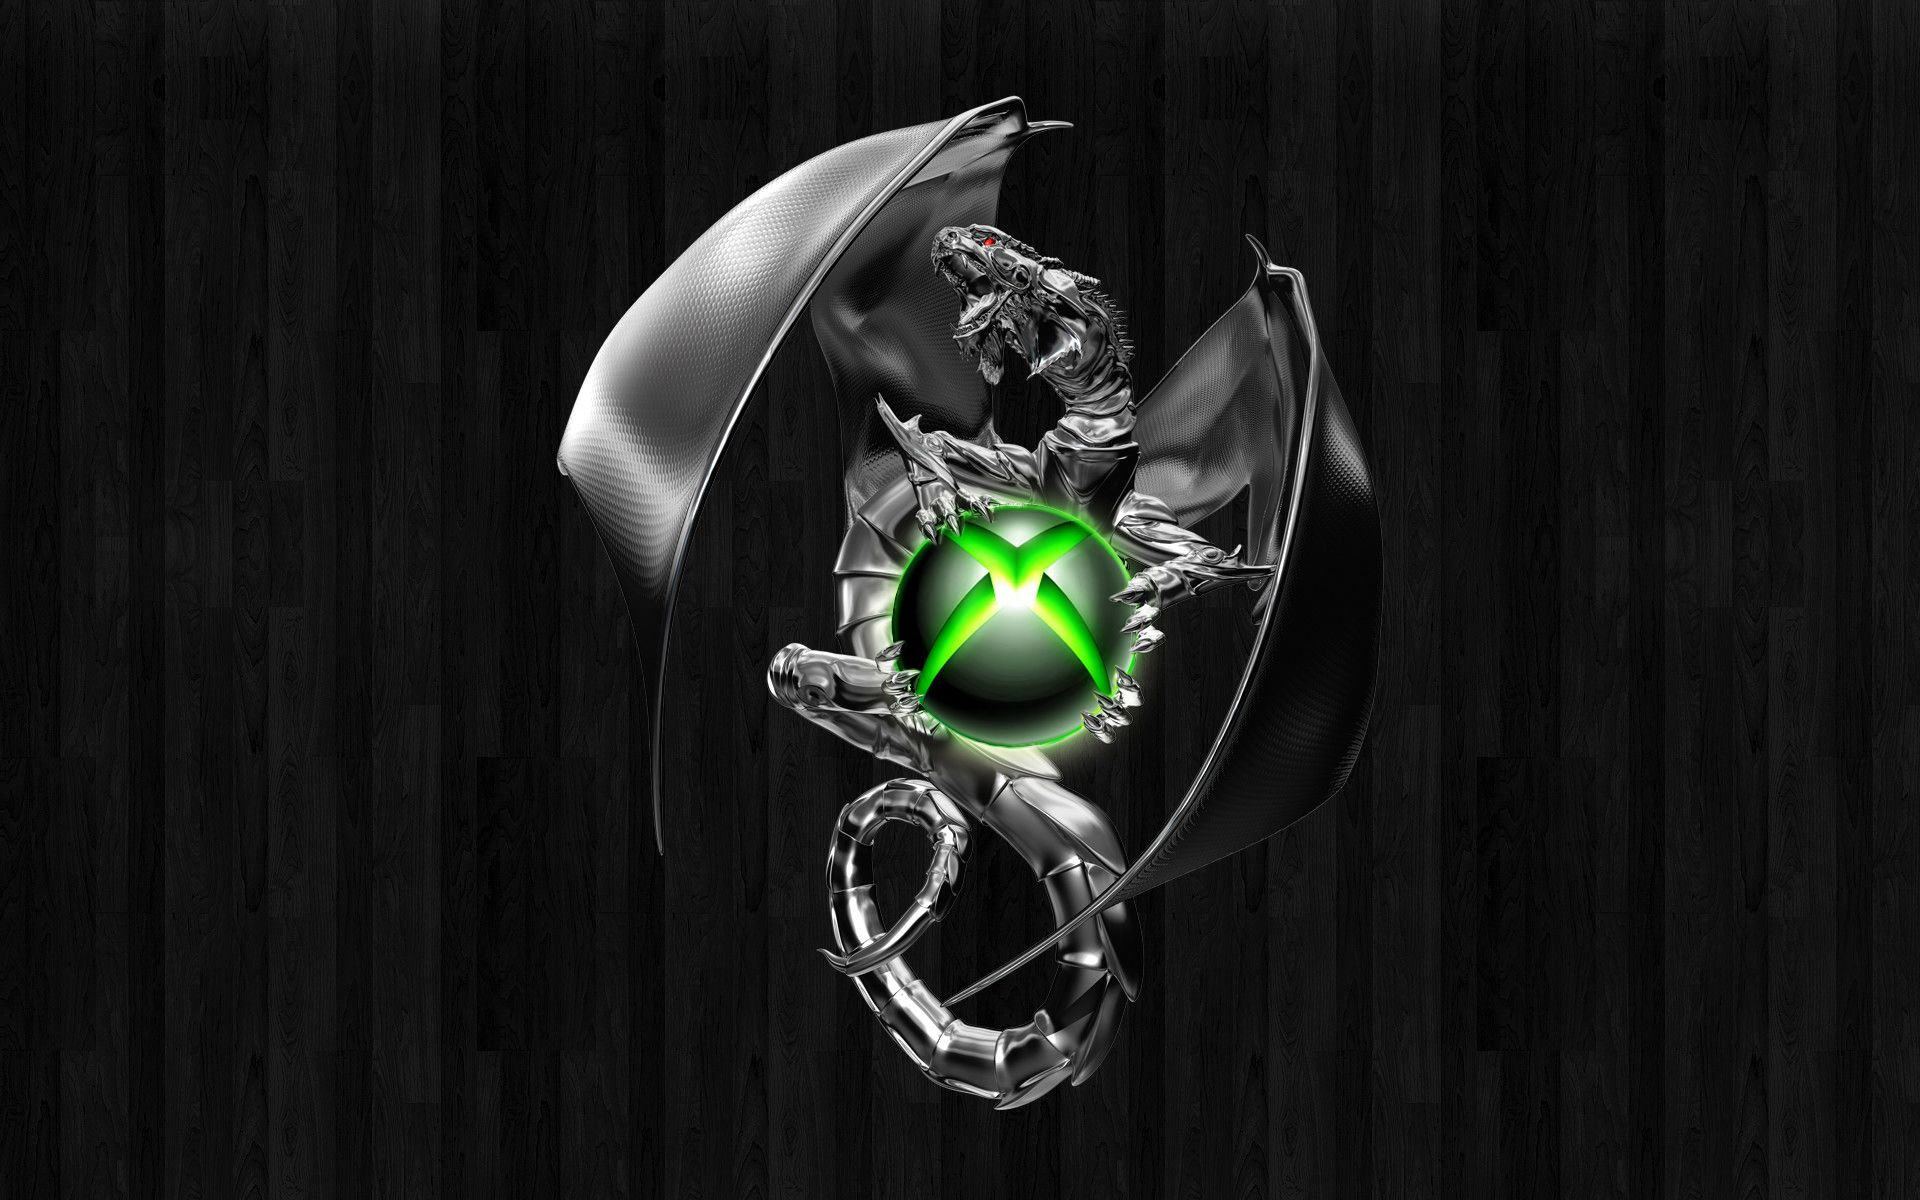 download free xbox grounded